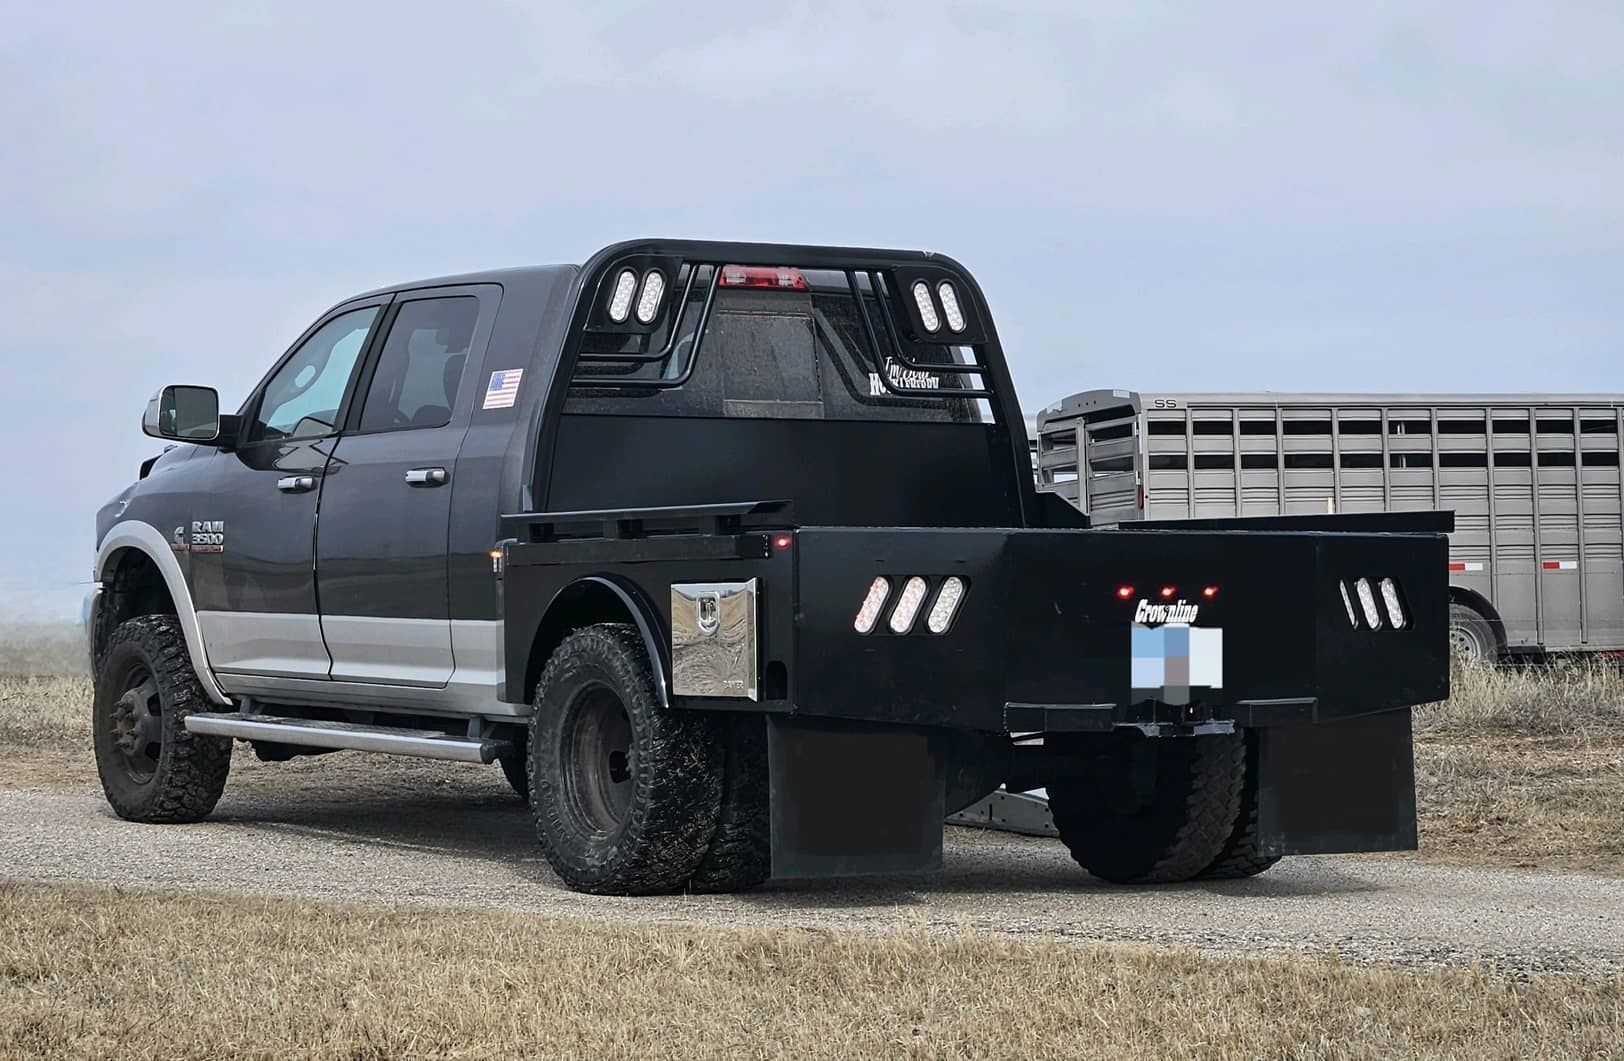 A black ram mega cab truck with a skirted flat bed with toolboxes is parked in a field.